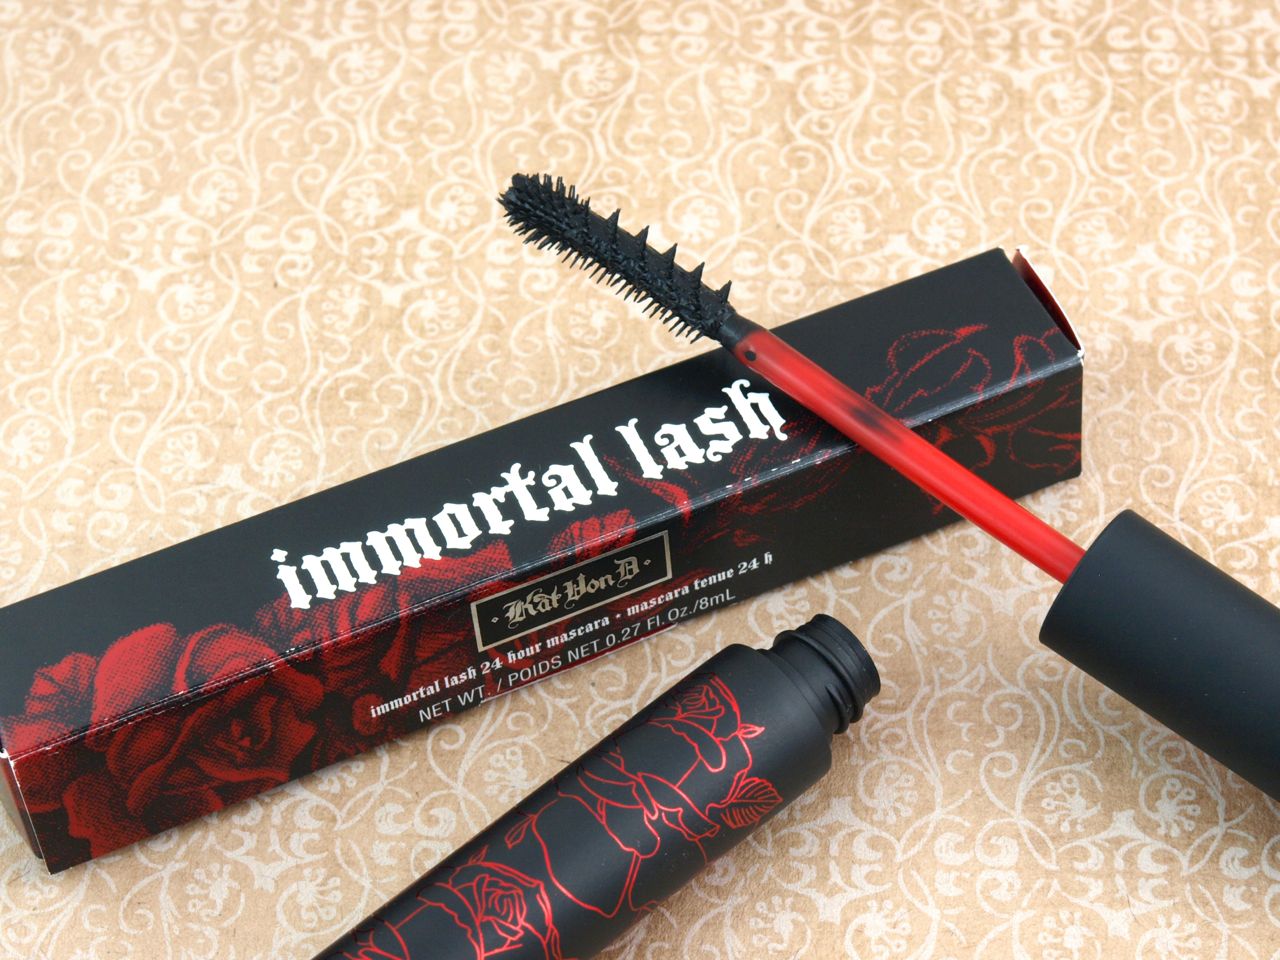 Kat Von D Immortal Lash 24 Hour Mascara: Review and Swatches